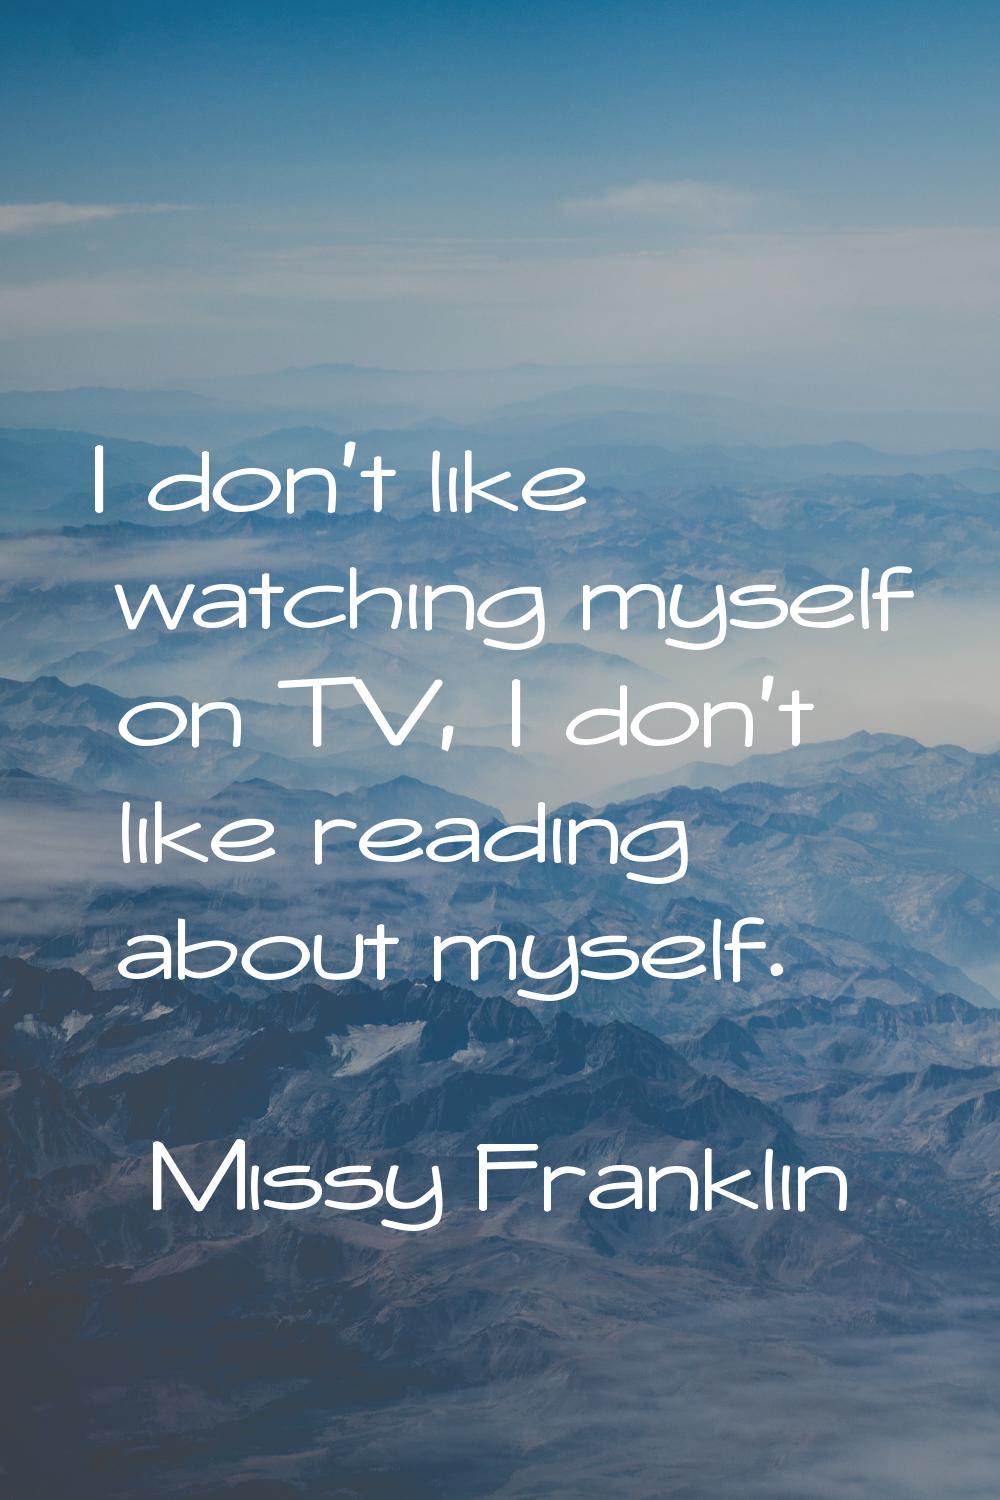 I don't like watching myself on TV, I don't like reading about myself.